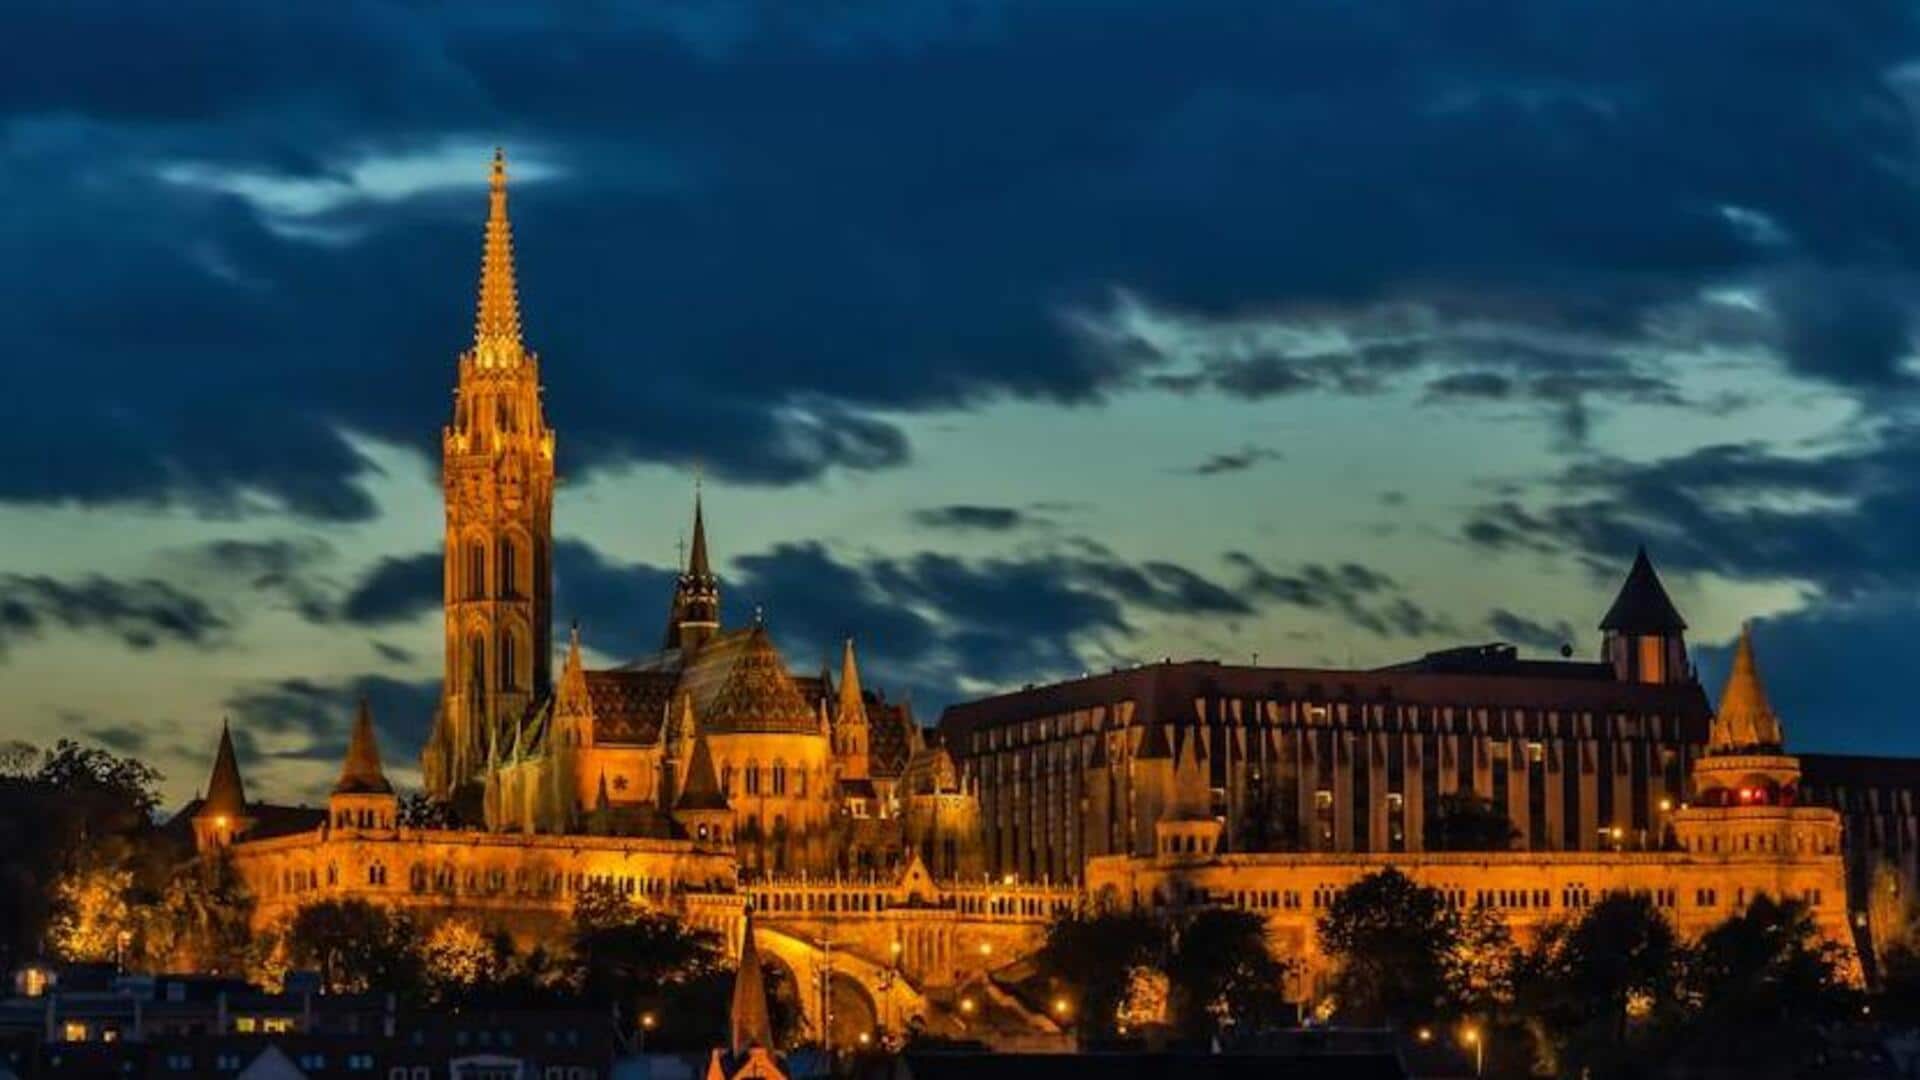 Traveling with family to Hungary? Visit these places